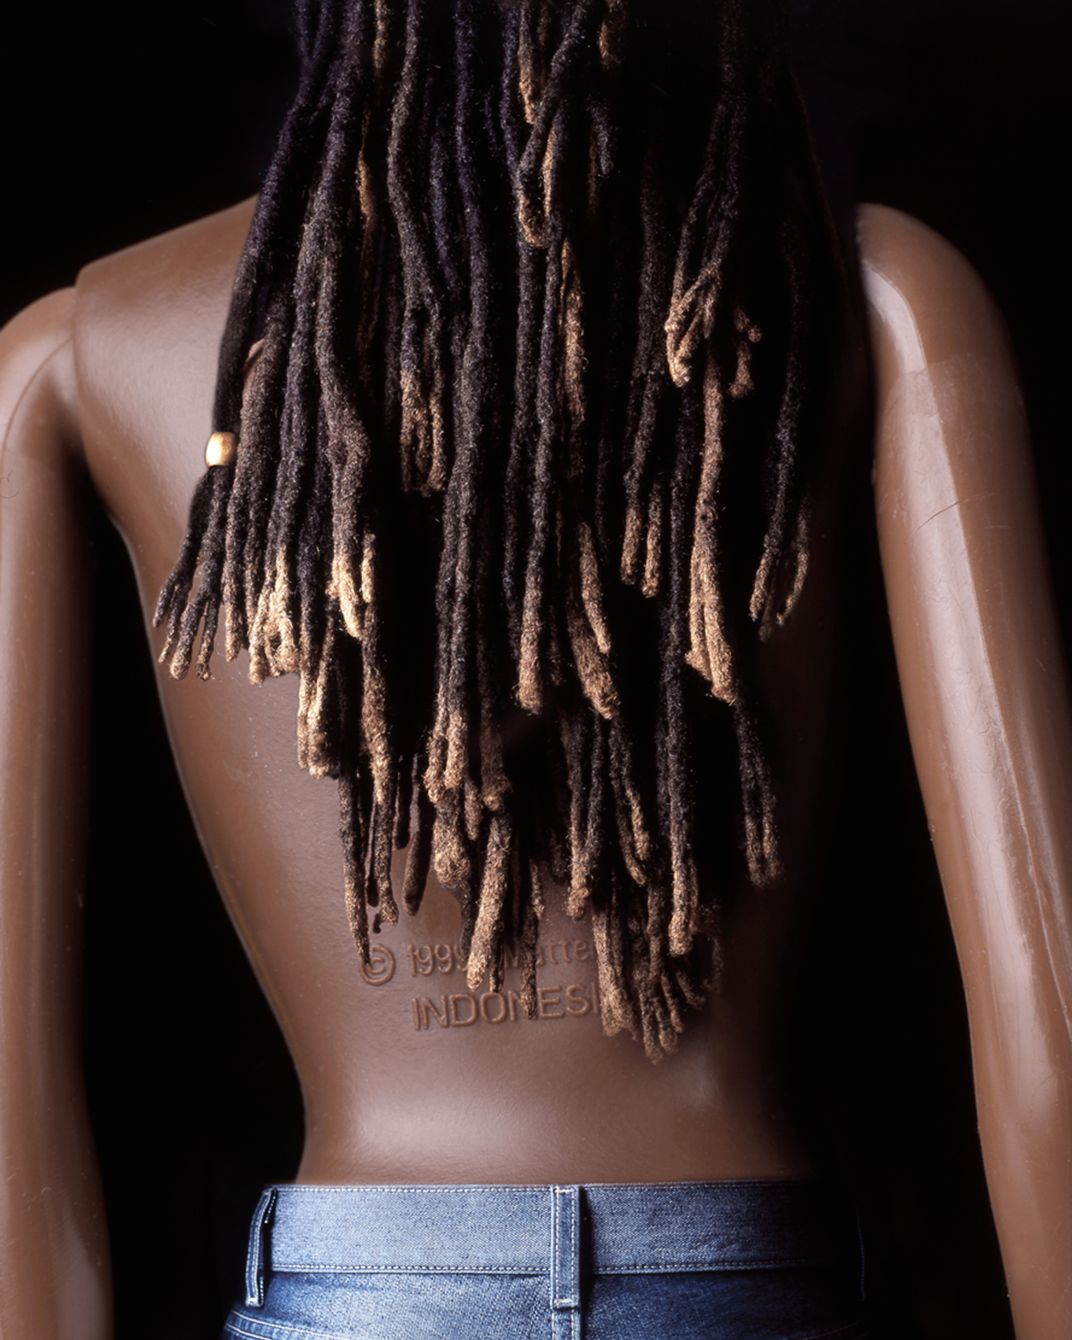 Black toy barbie blended with female real hair in photo illustration